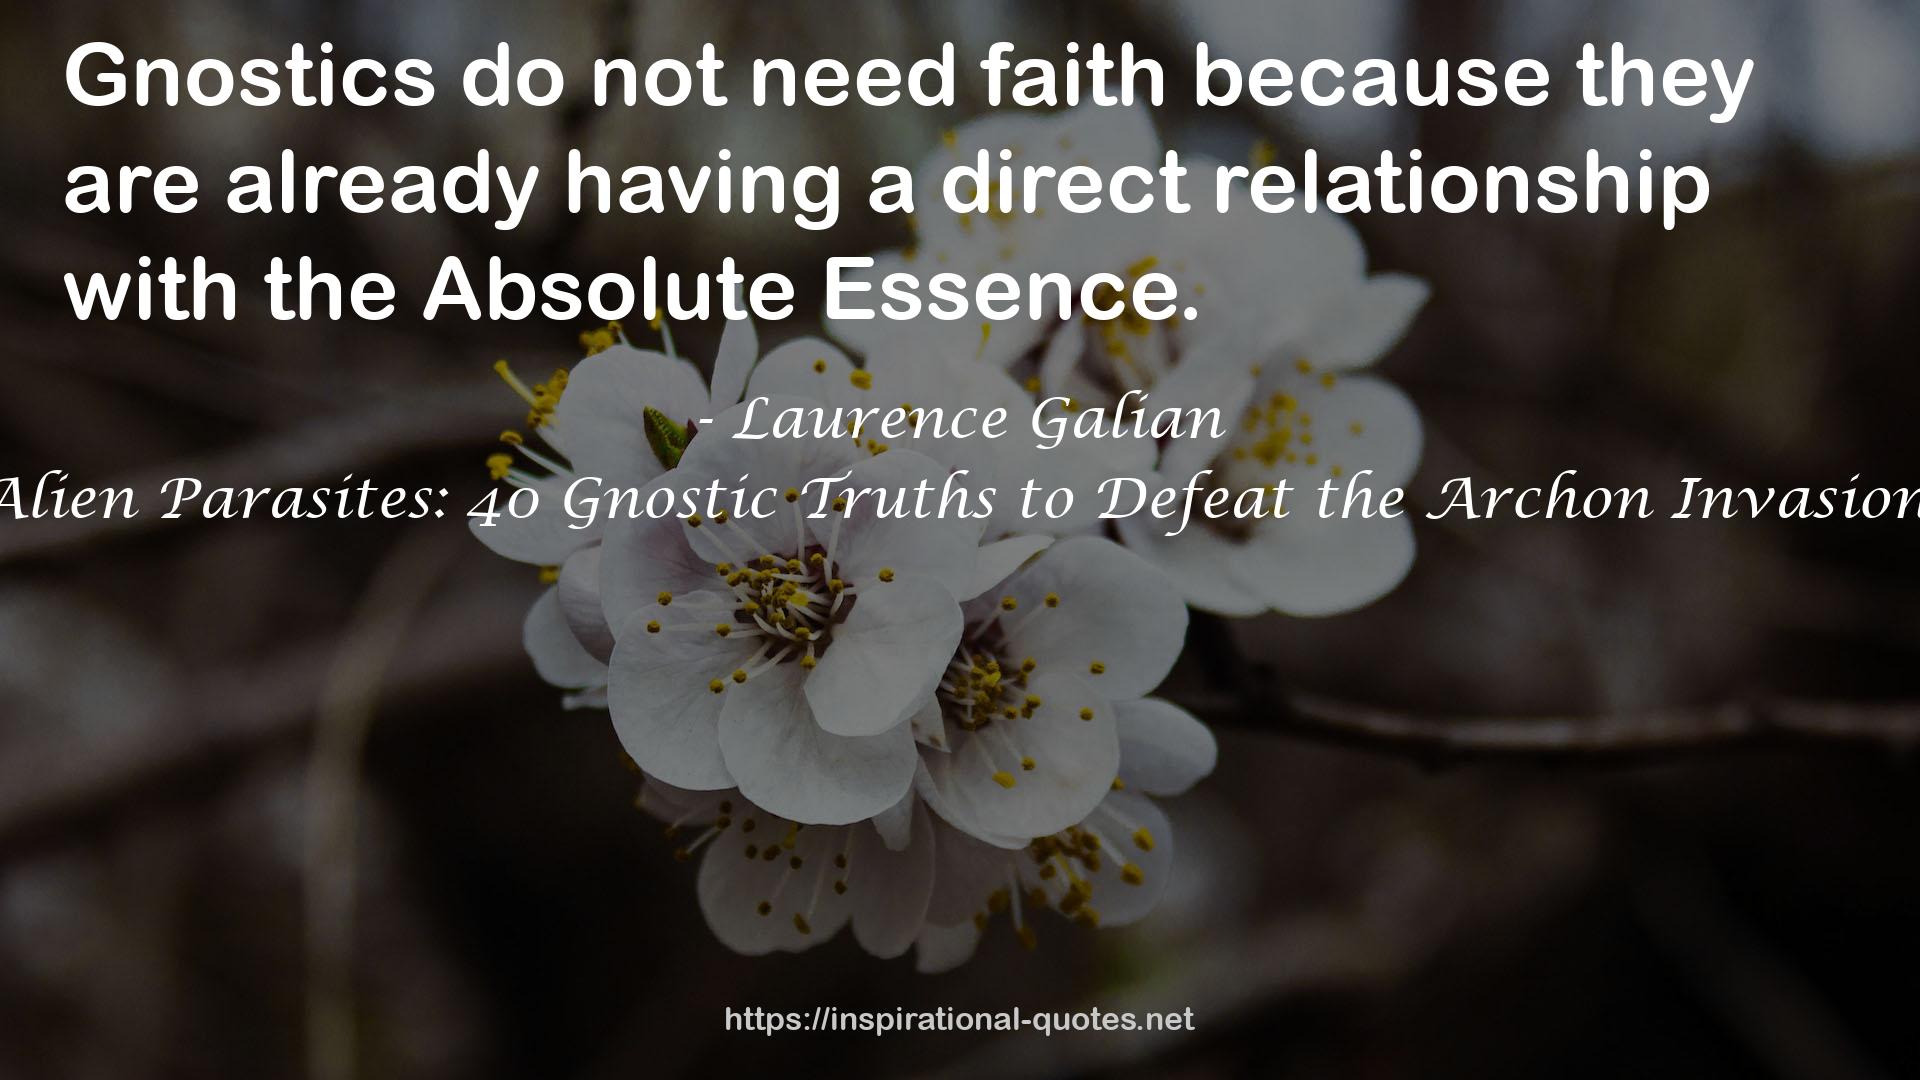 Laurence Galian QUOTES